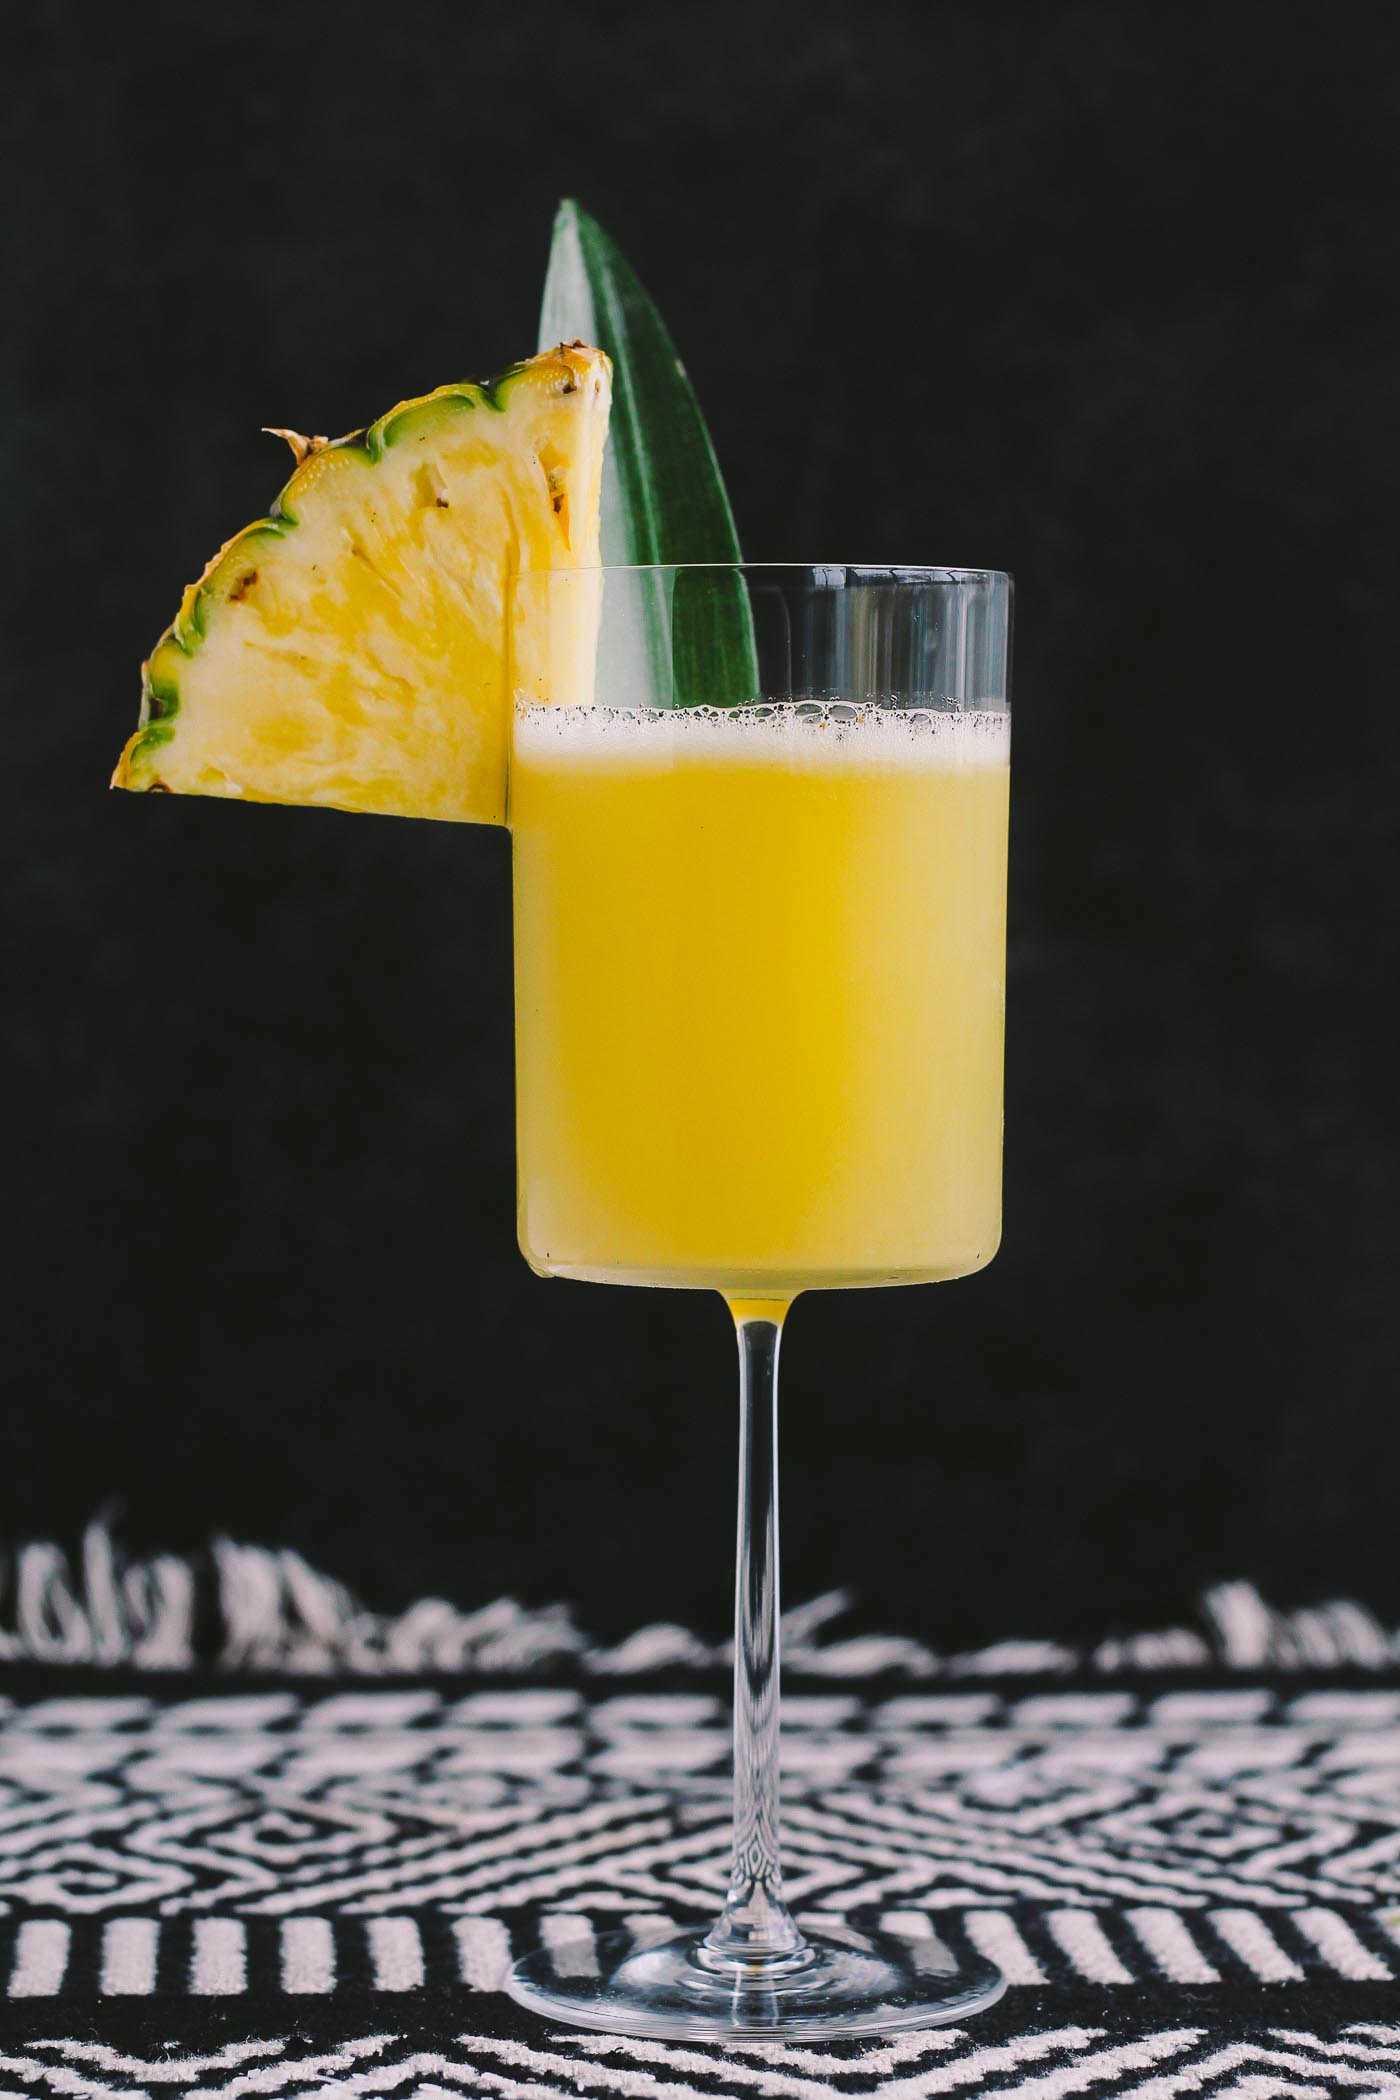 smoky pineapple mezcal margaritas with vanilla bean are the perfect fun cocktail to celebrate cinco de mayo! the smoke & bite of good mezcal is balanced with the natural sweetness of pineapple juice & vanilla bean. | cinco de mayo party, margarita recipe, mezcal, easy cocktail recipe, cocktail, summer drink, party drink |